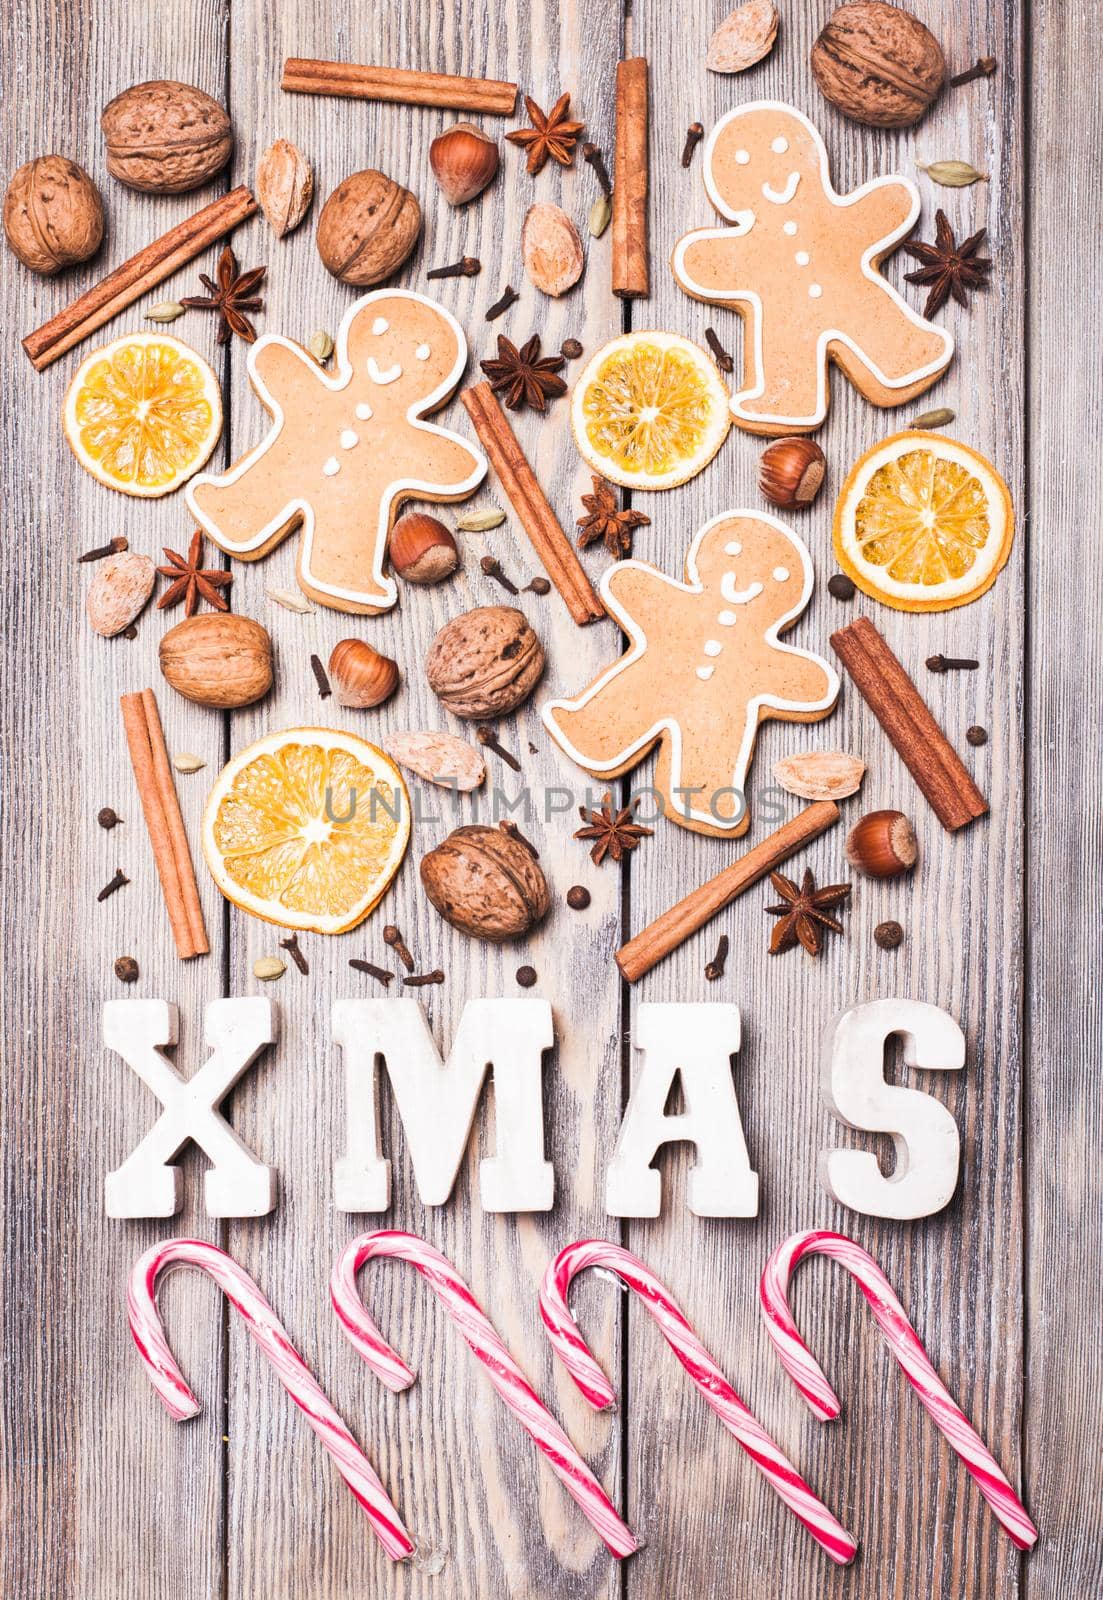 Gingerbreads with spices on the wooden table, wooden letters XMAS and Santa staffs candies. Christmas aroma decor